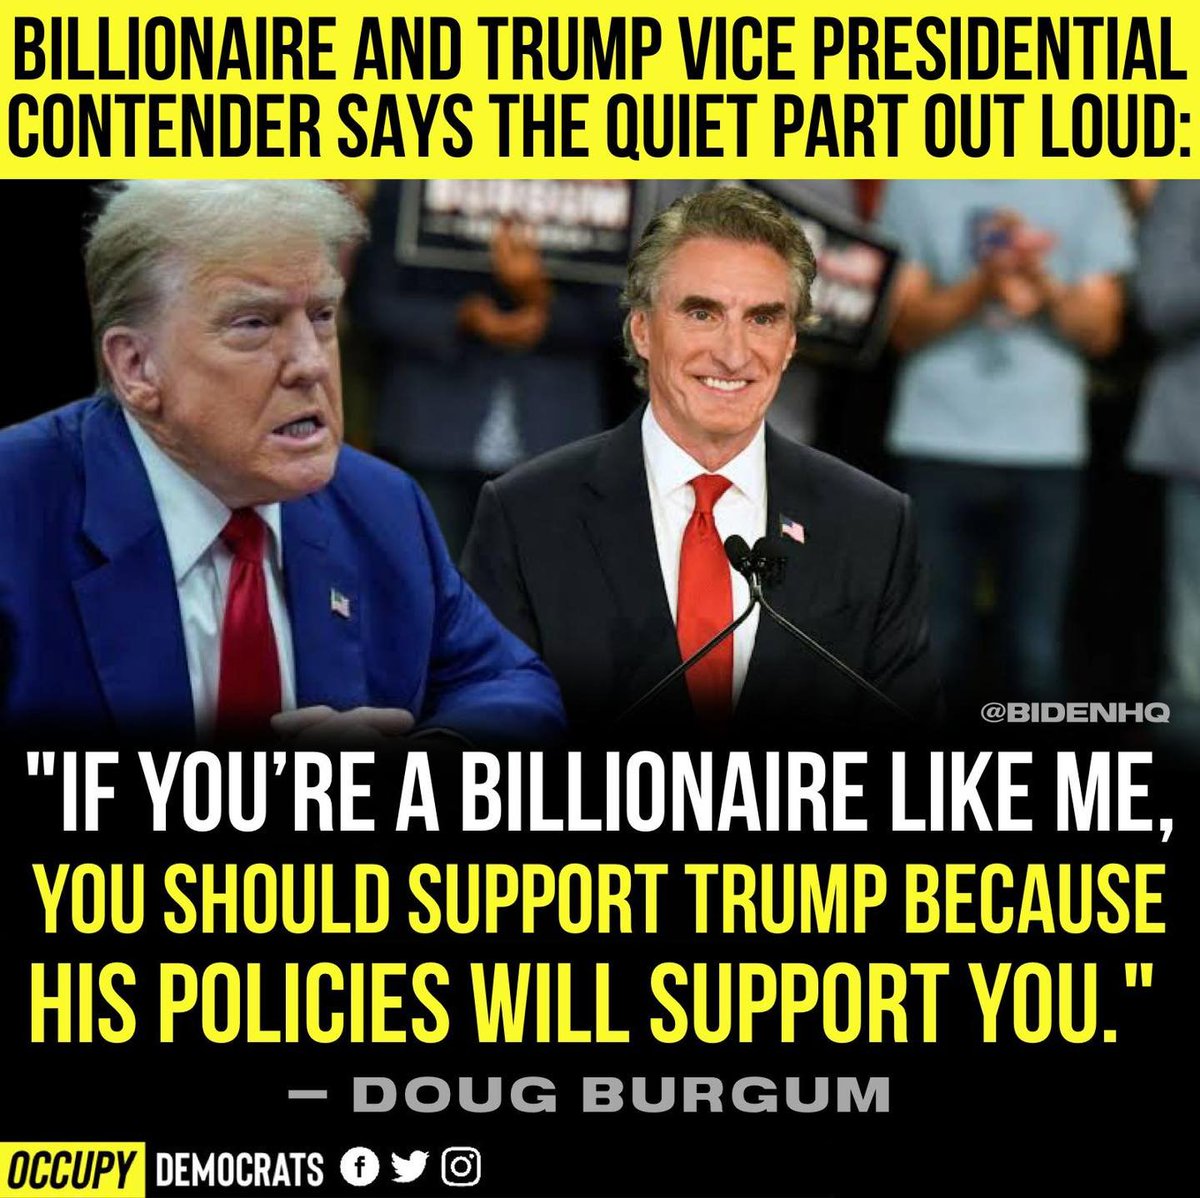 Republicans are for billionaires! Democrats are for everyone else!